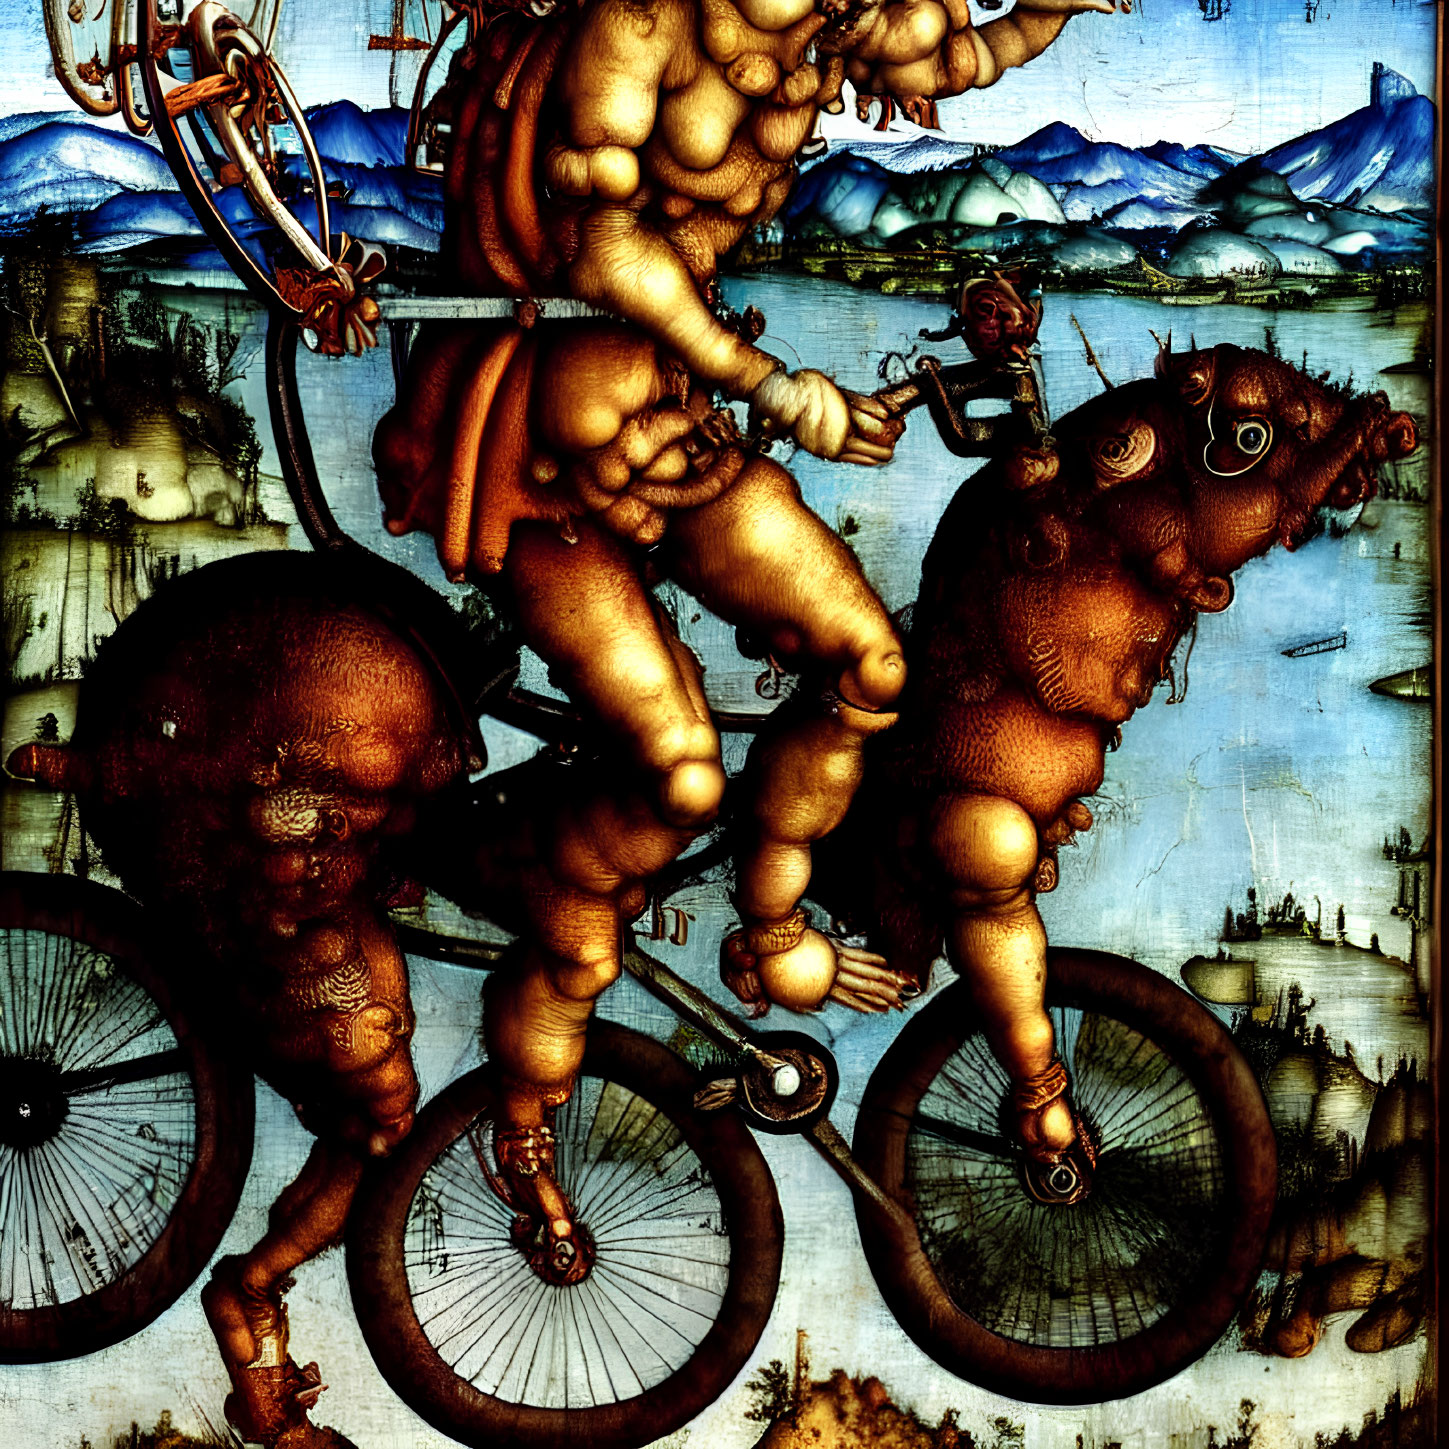 Detailed Artwork of Muscular Figures on Tandem Bicycles in Mountain Setting